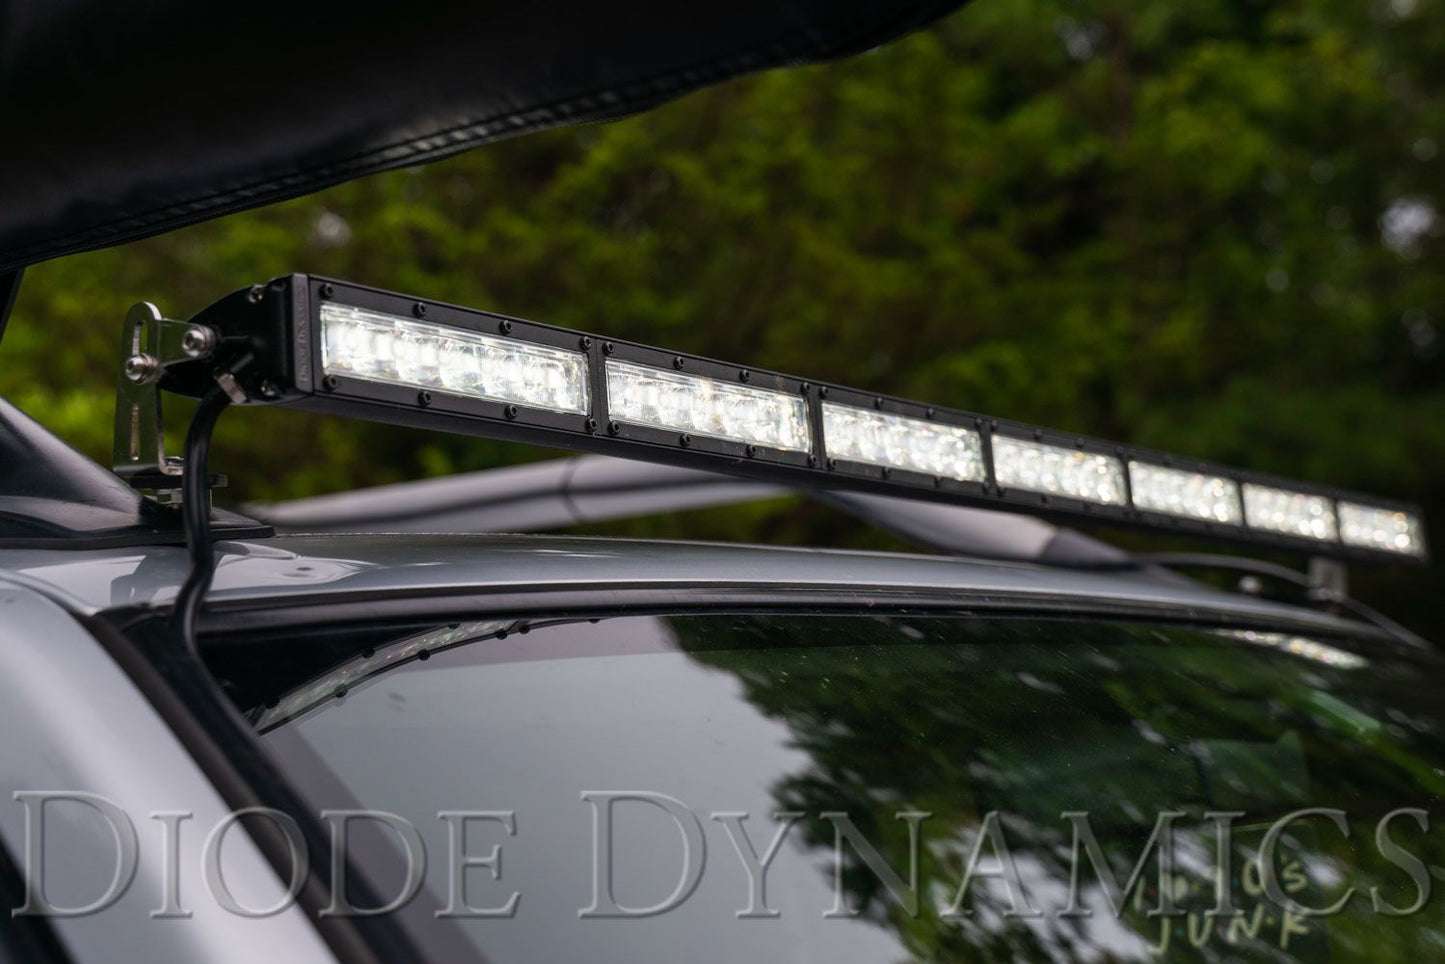 Stage Series 42" Light Bar -by Diode Dynamics